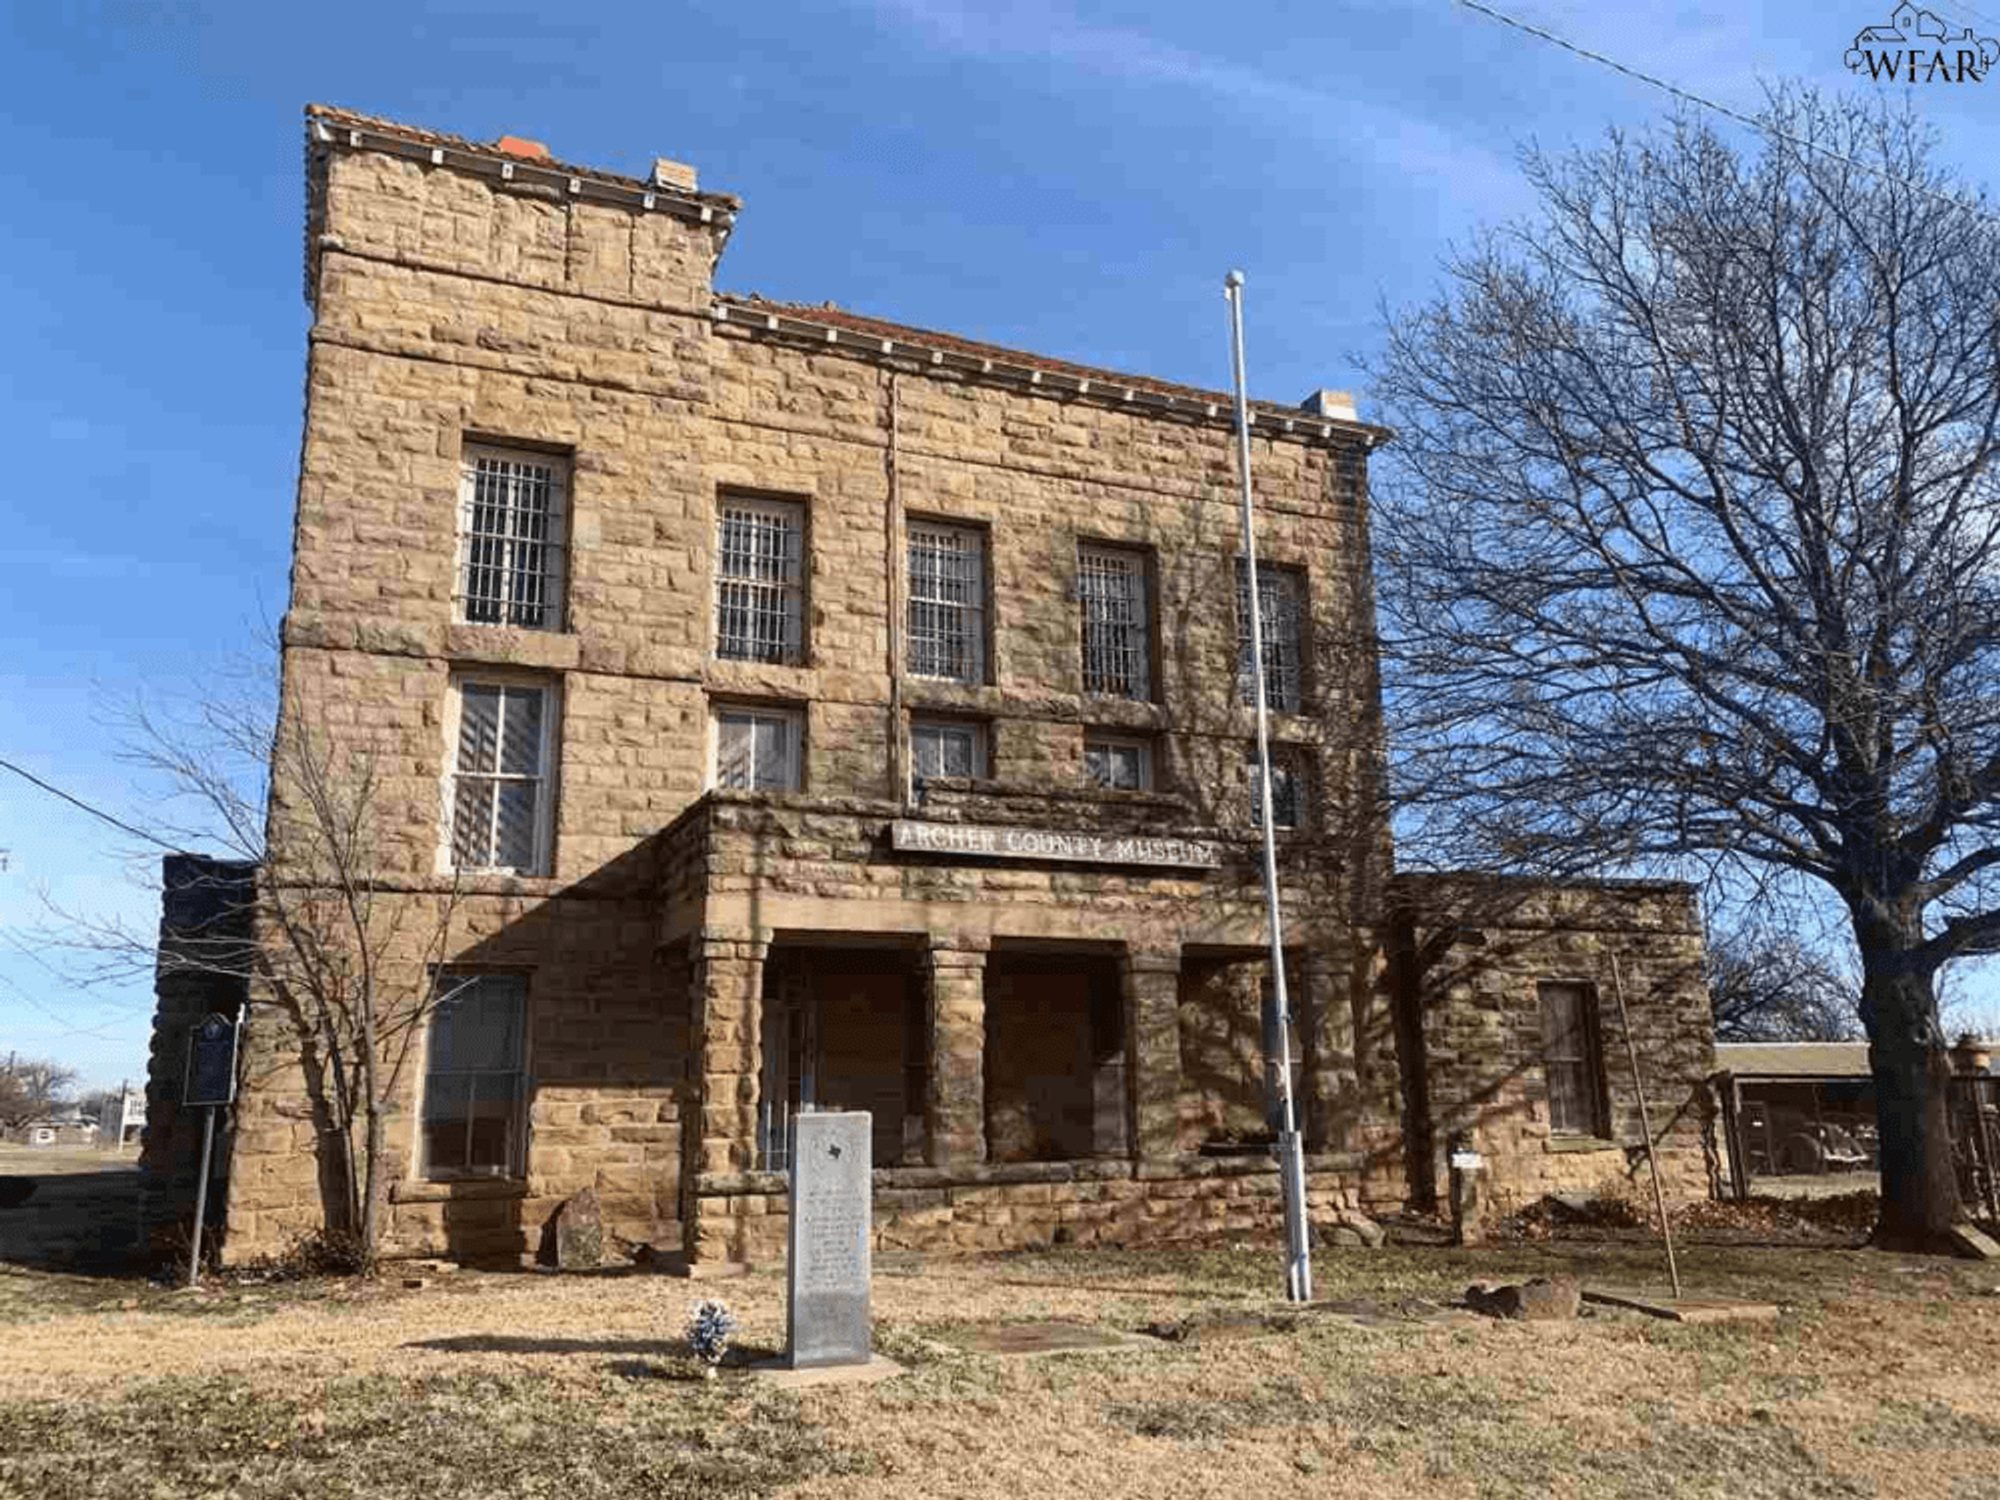 The old Archer County Jail is for sale for just $5,000.